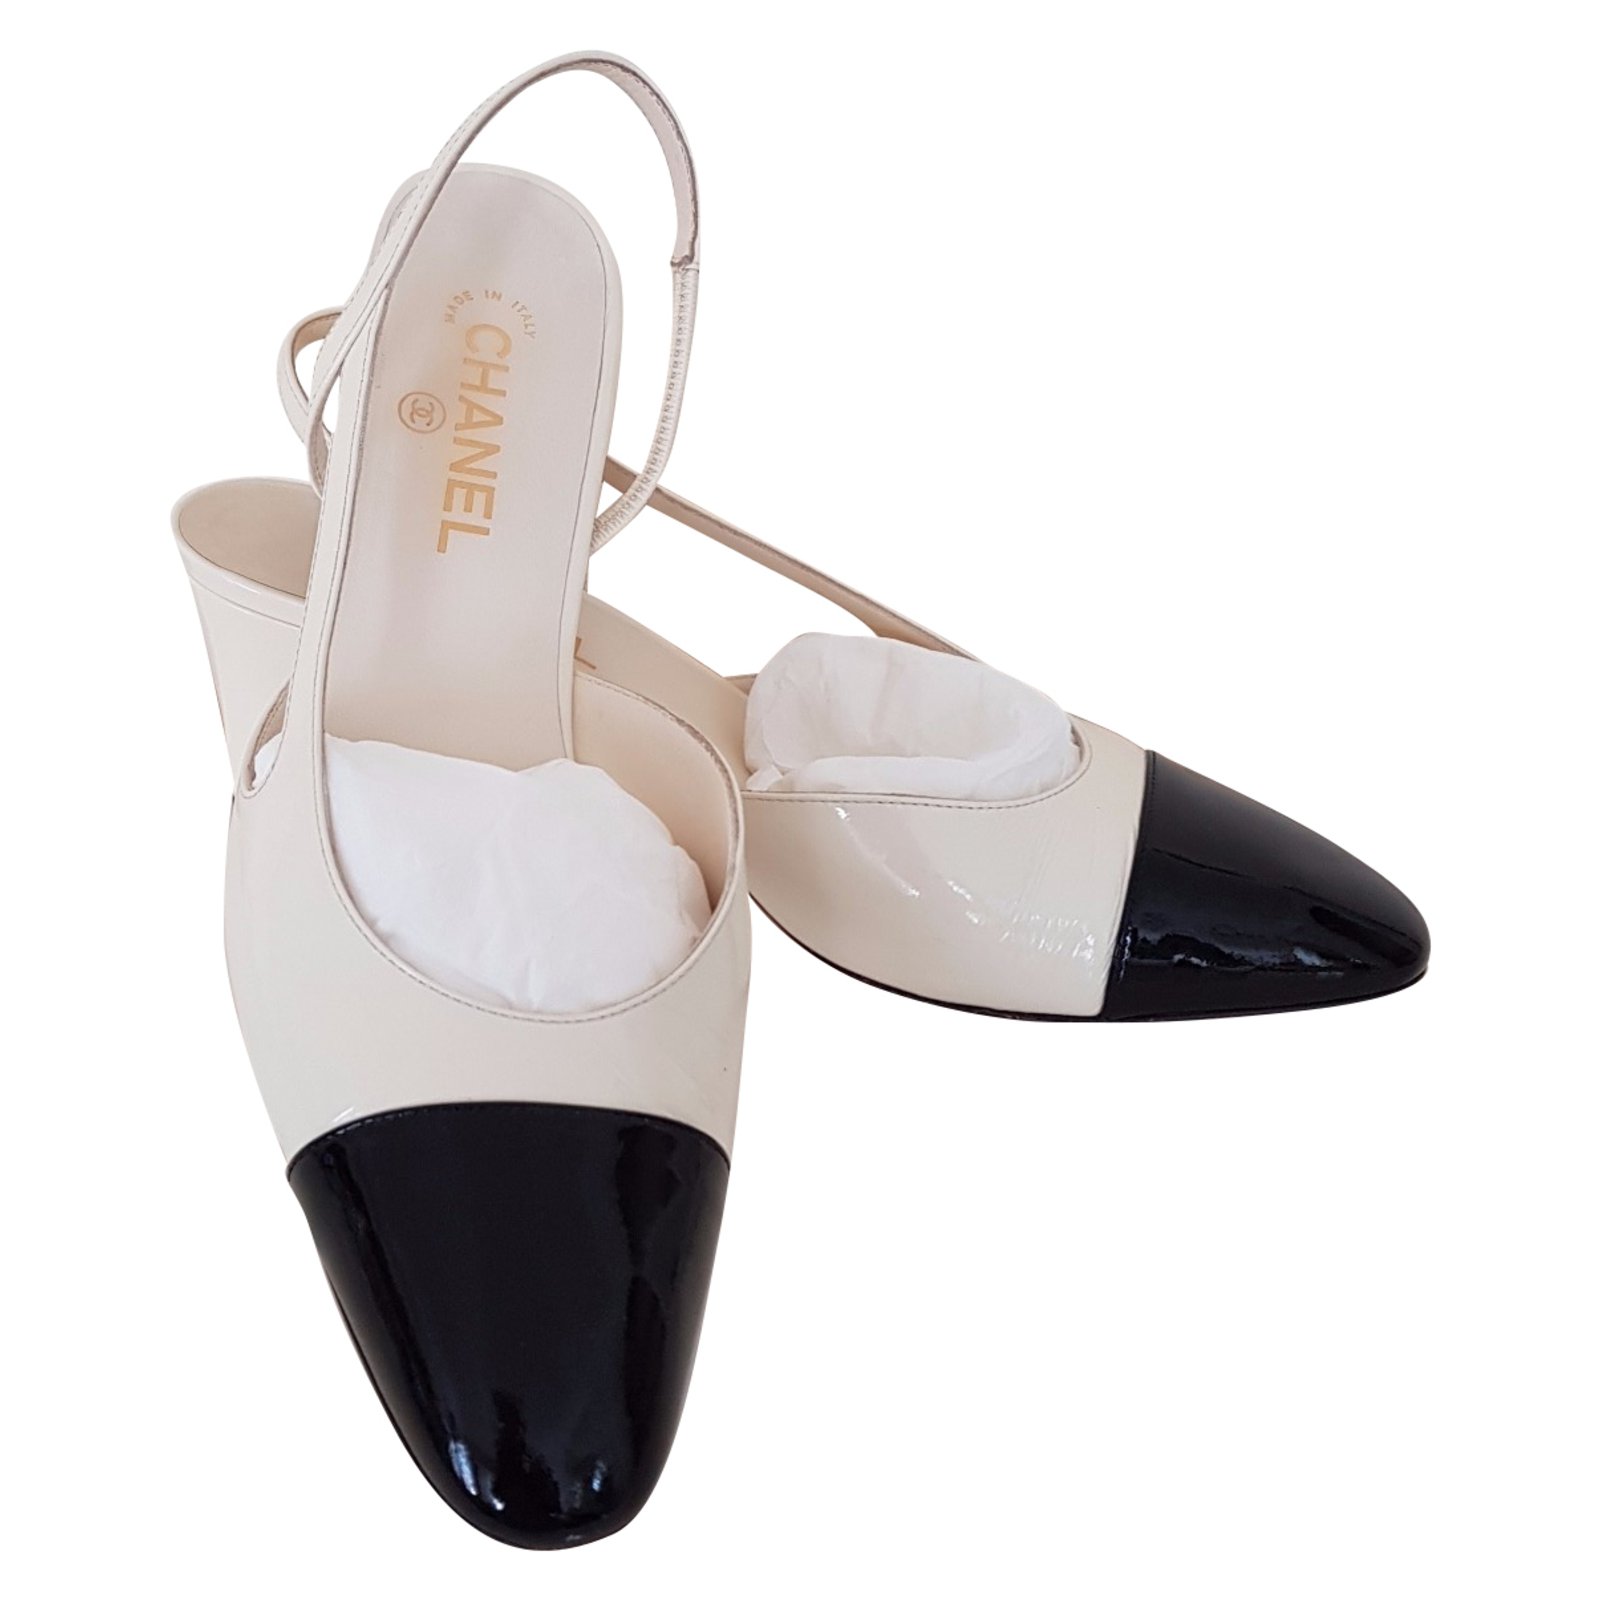 Chanel - Authenticated Mules - Patent Leather Beige Plain for Women, Very Good Condition